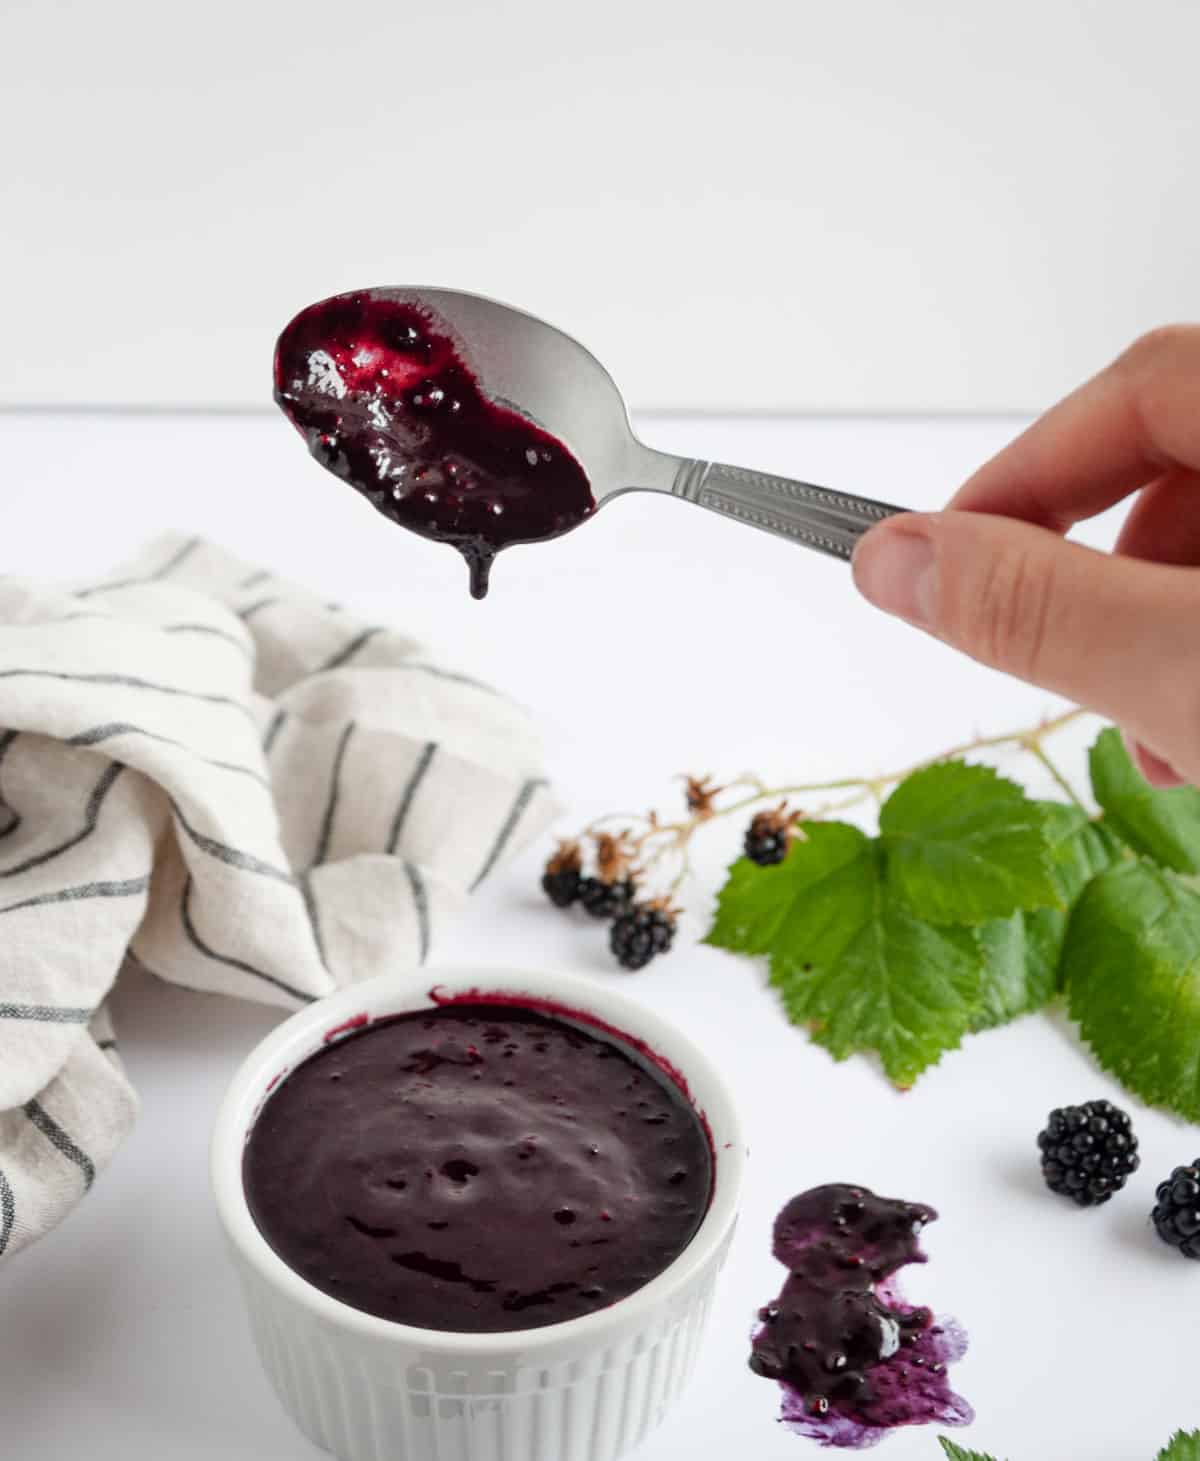 Hand holding spoon with dark sauce on it over a bowl with more in it and blackberries in background